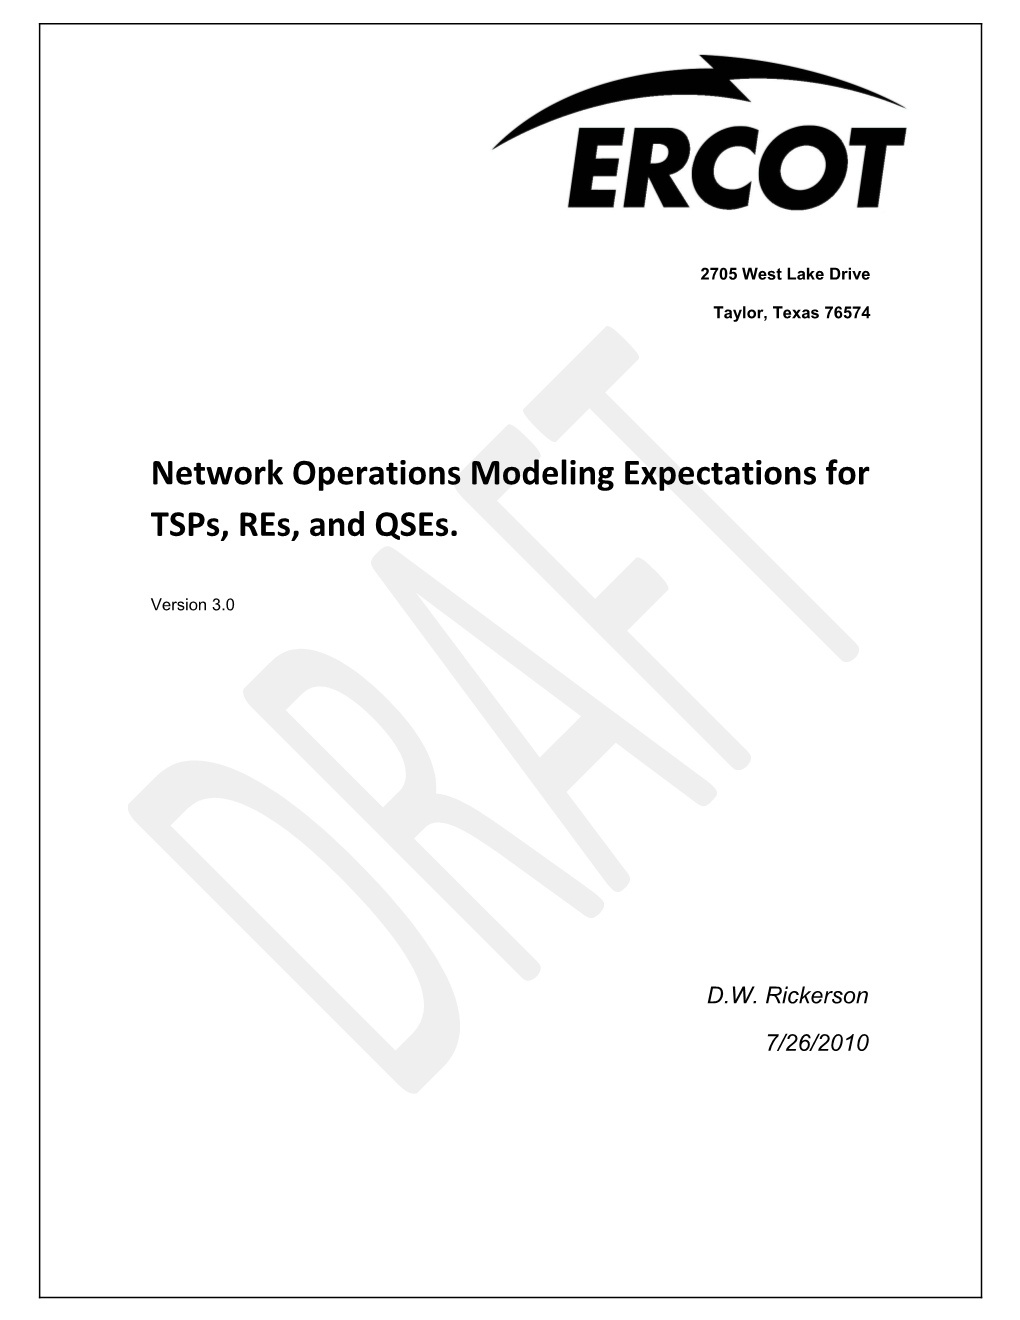 Network Operations Modeling Expectations for Tsps, Res, and Qses